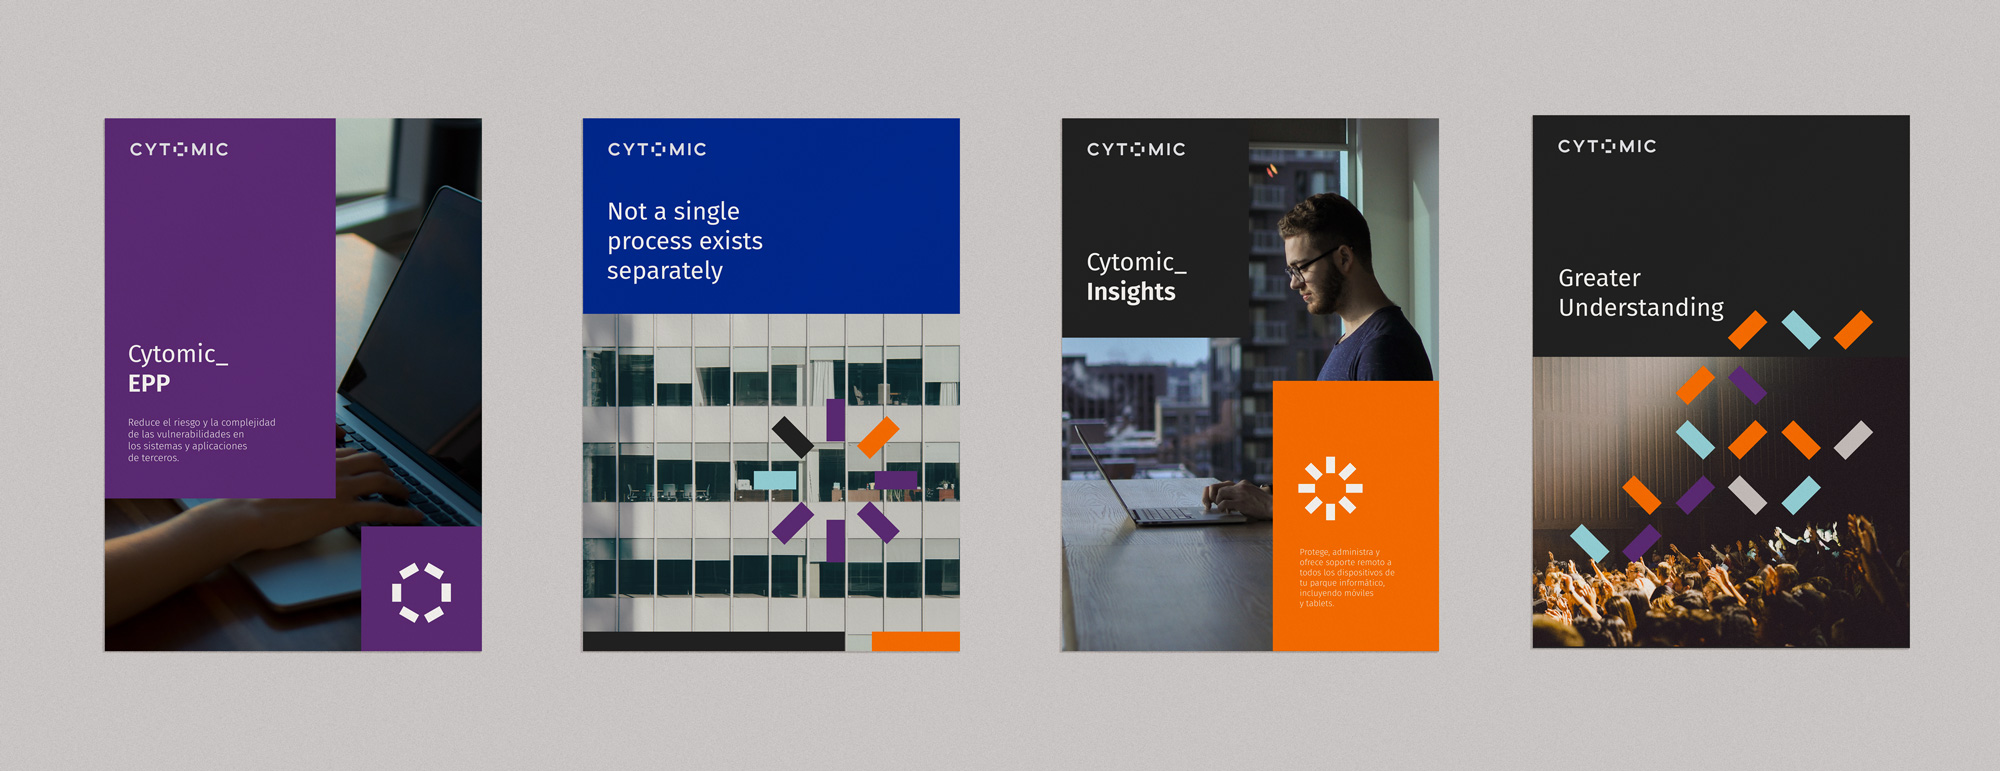 New Logo and Identity for Cytomic by The Woork Co